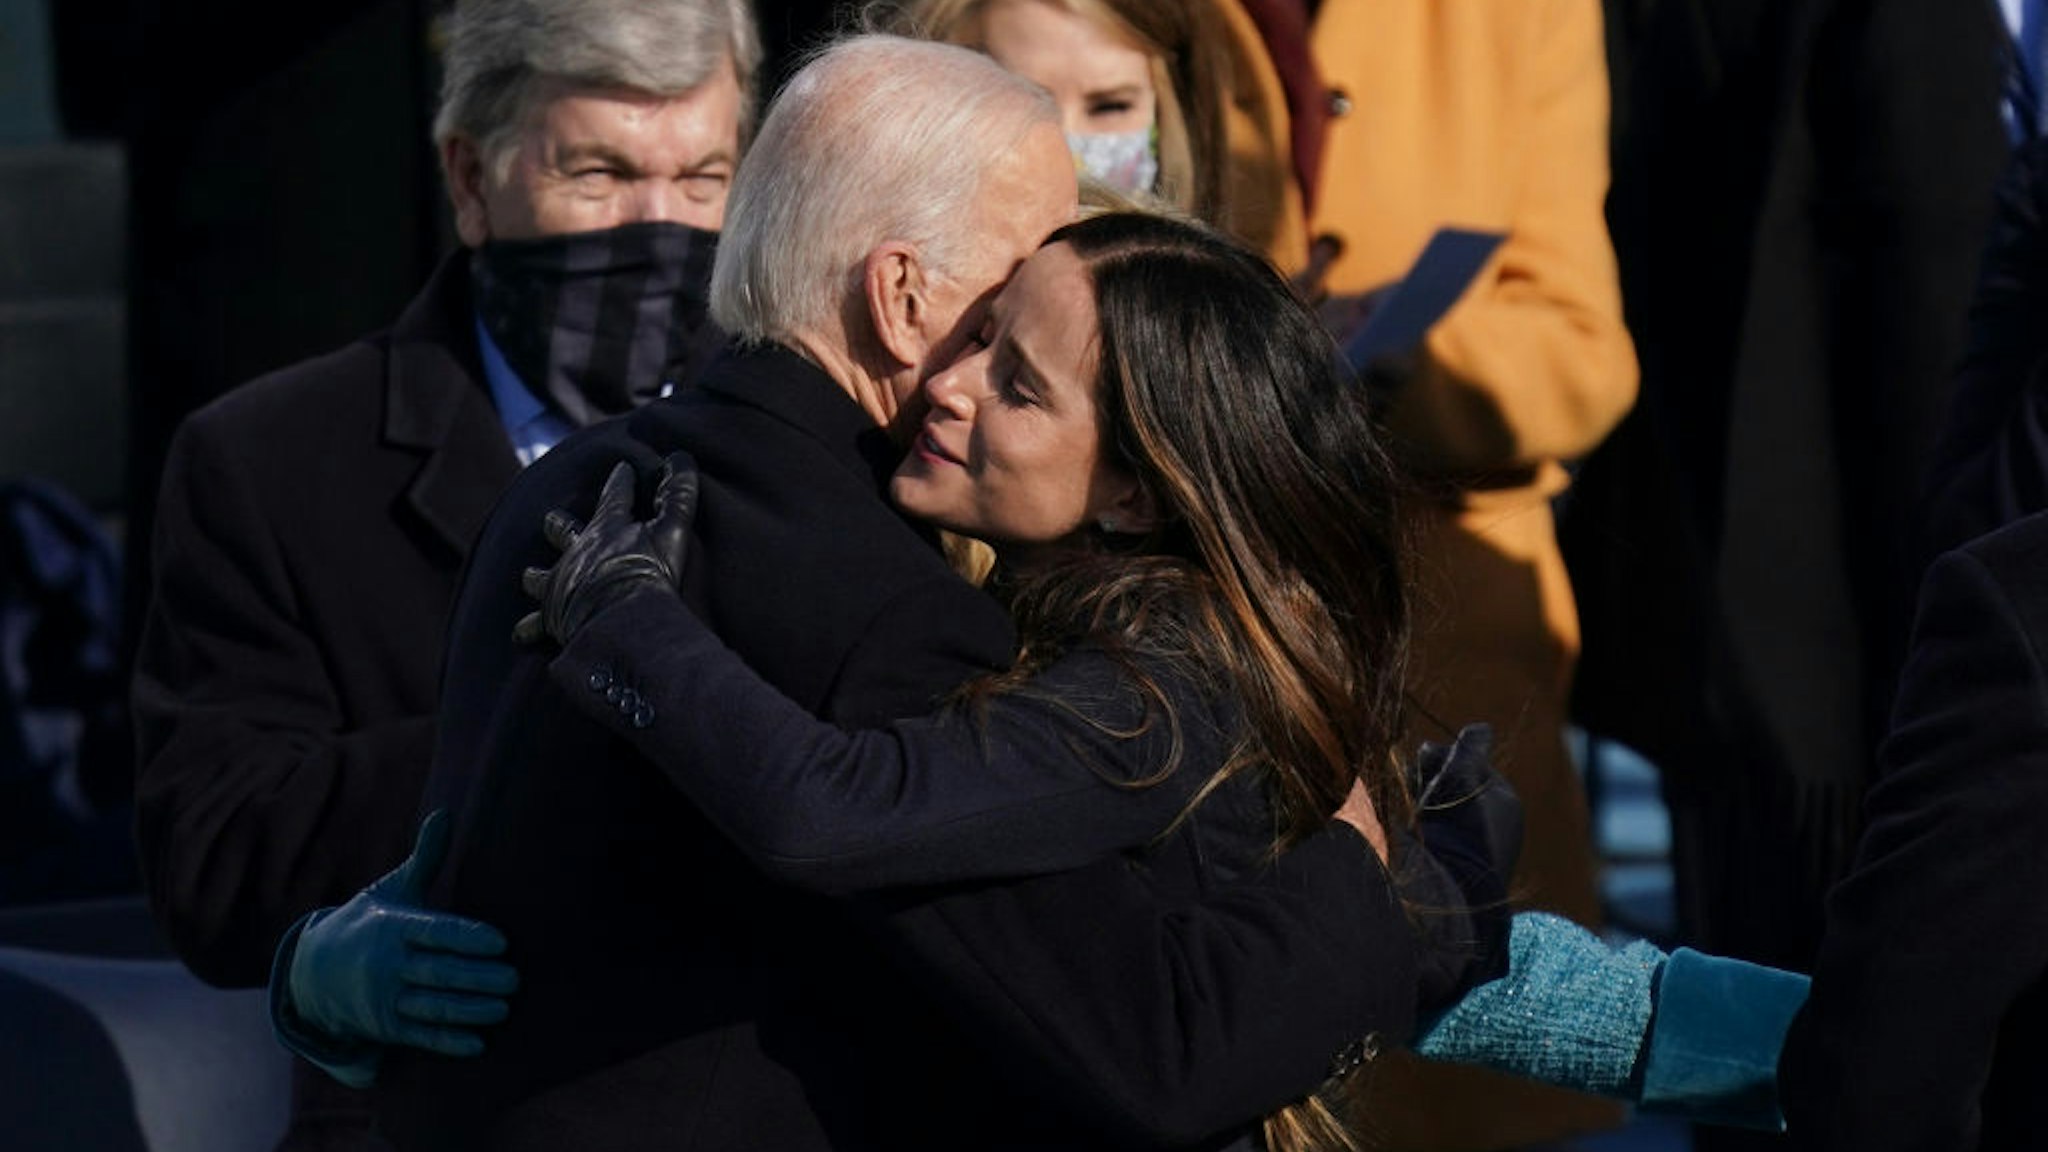 Joe Biden hugged his daughter Ashley after he was sworn in as the 46th President of the United States on Capitol Hill in Washington, DC on January 20, 2020. (Erin Schaff/The New York Times NYTINAUG